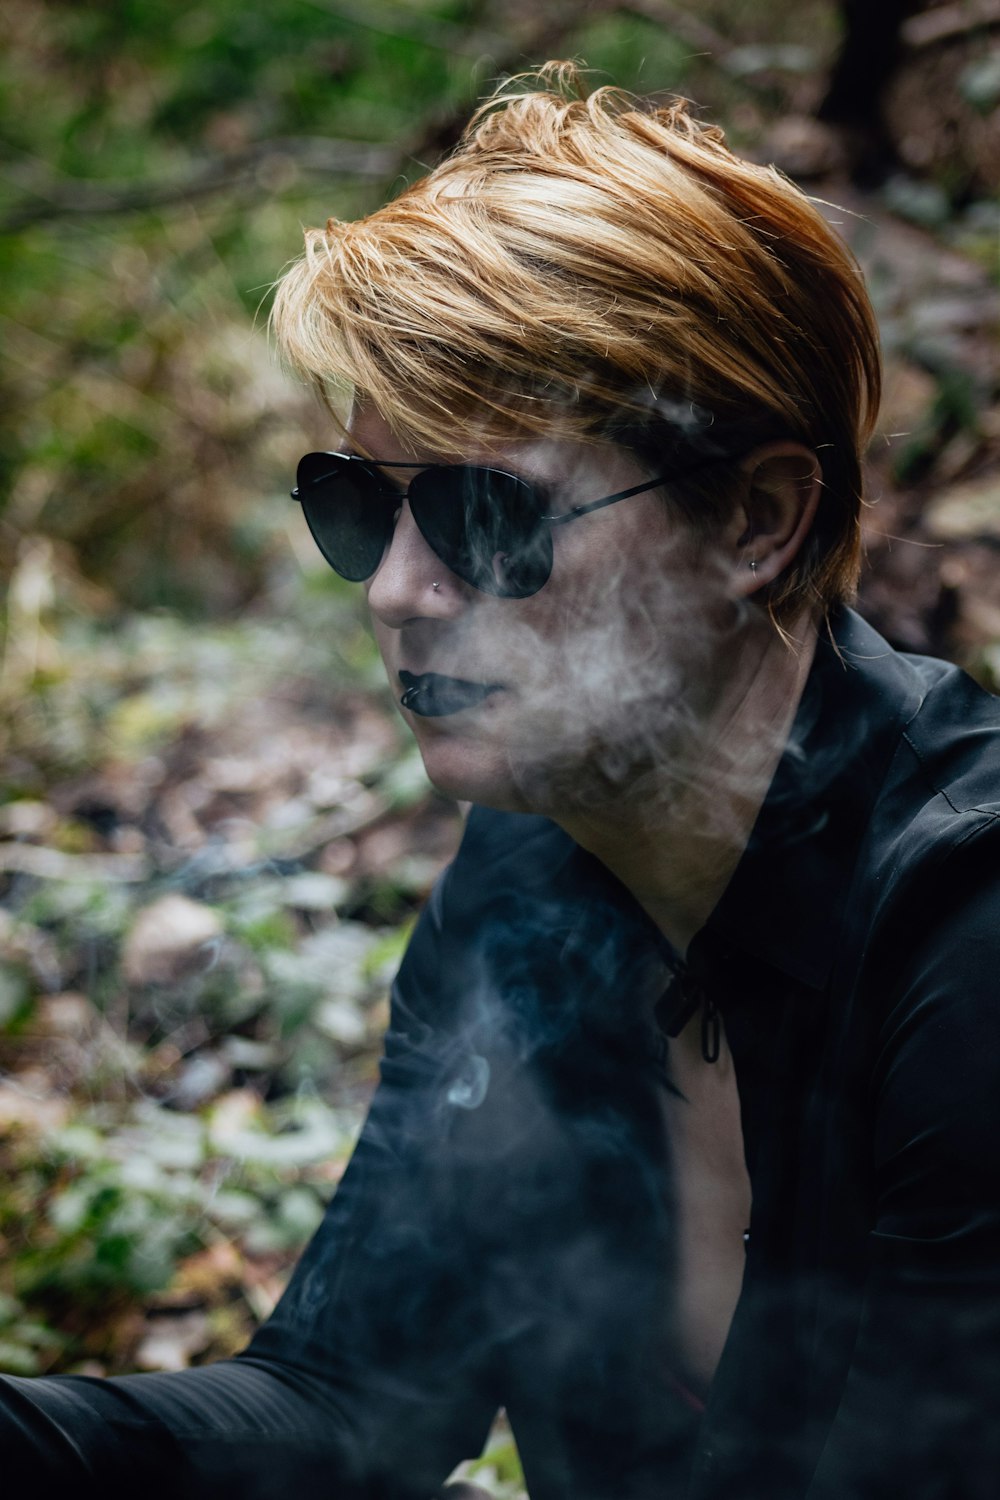 a man with red hair and sunglasses smoking a cigarette